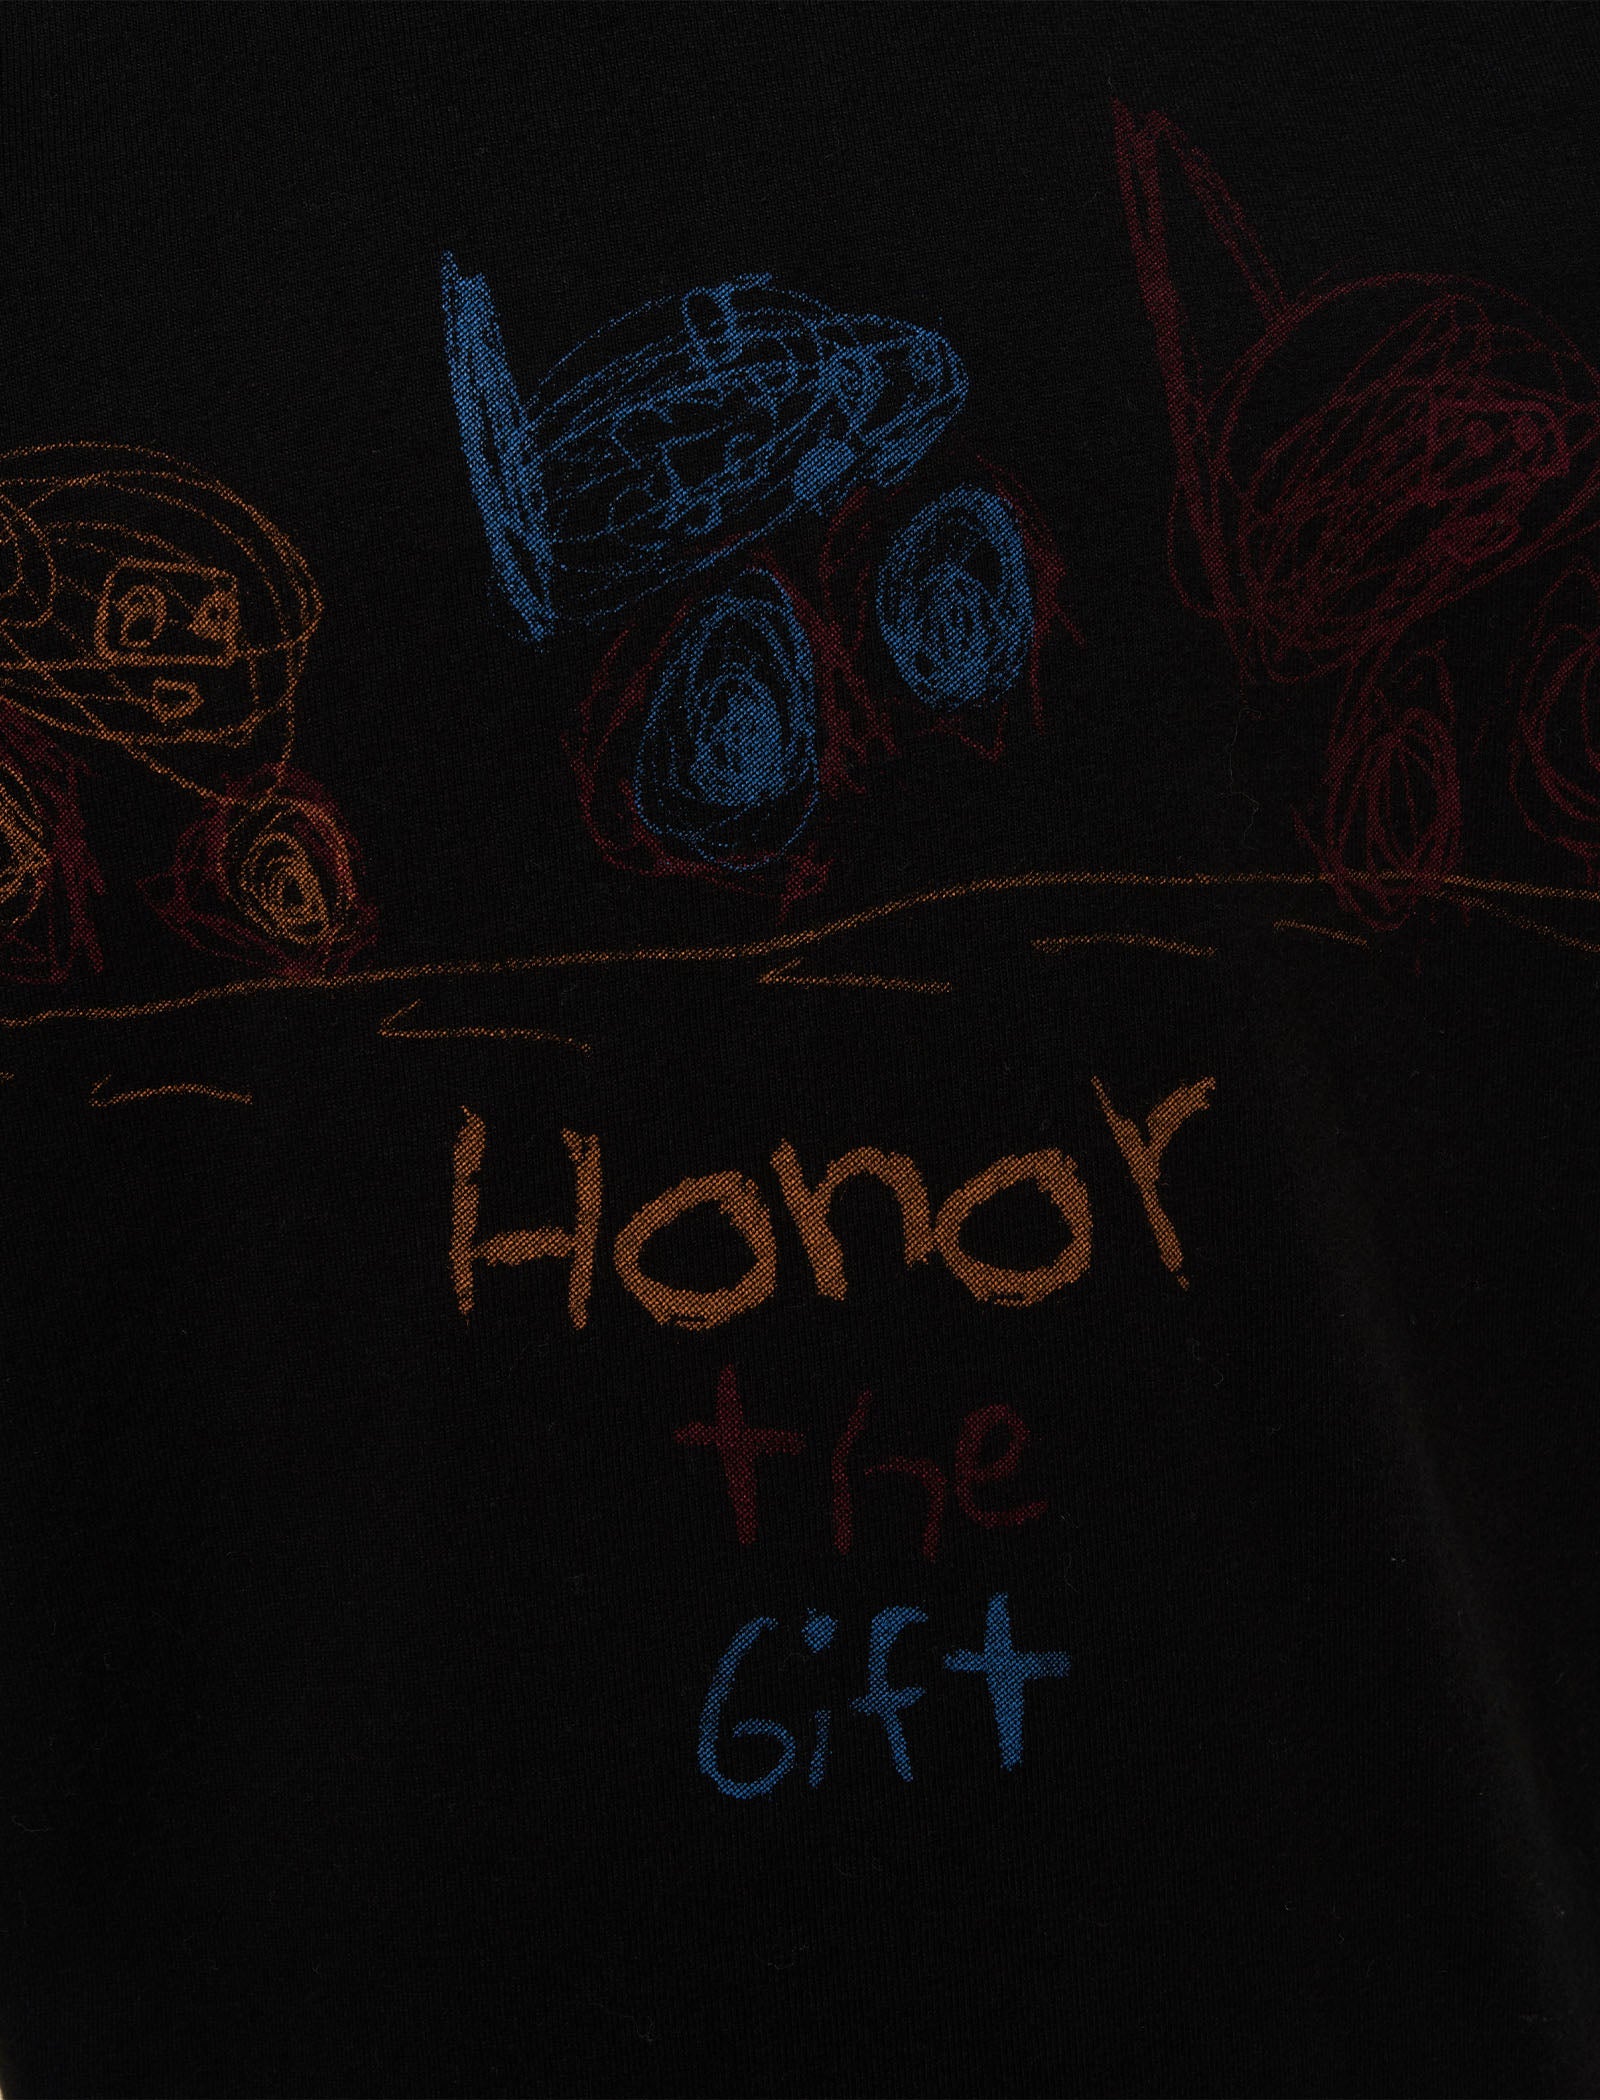 HONOR THE GIFT KIDS FAST CARS SHORT SLEEVE TEE